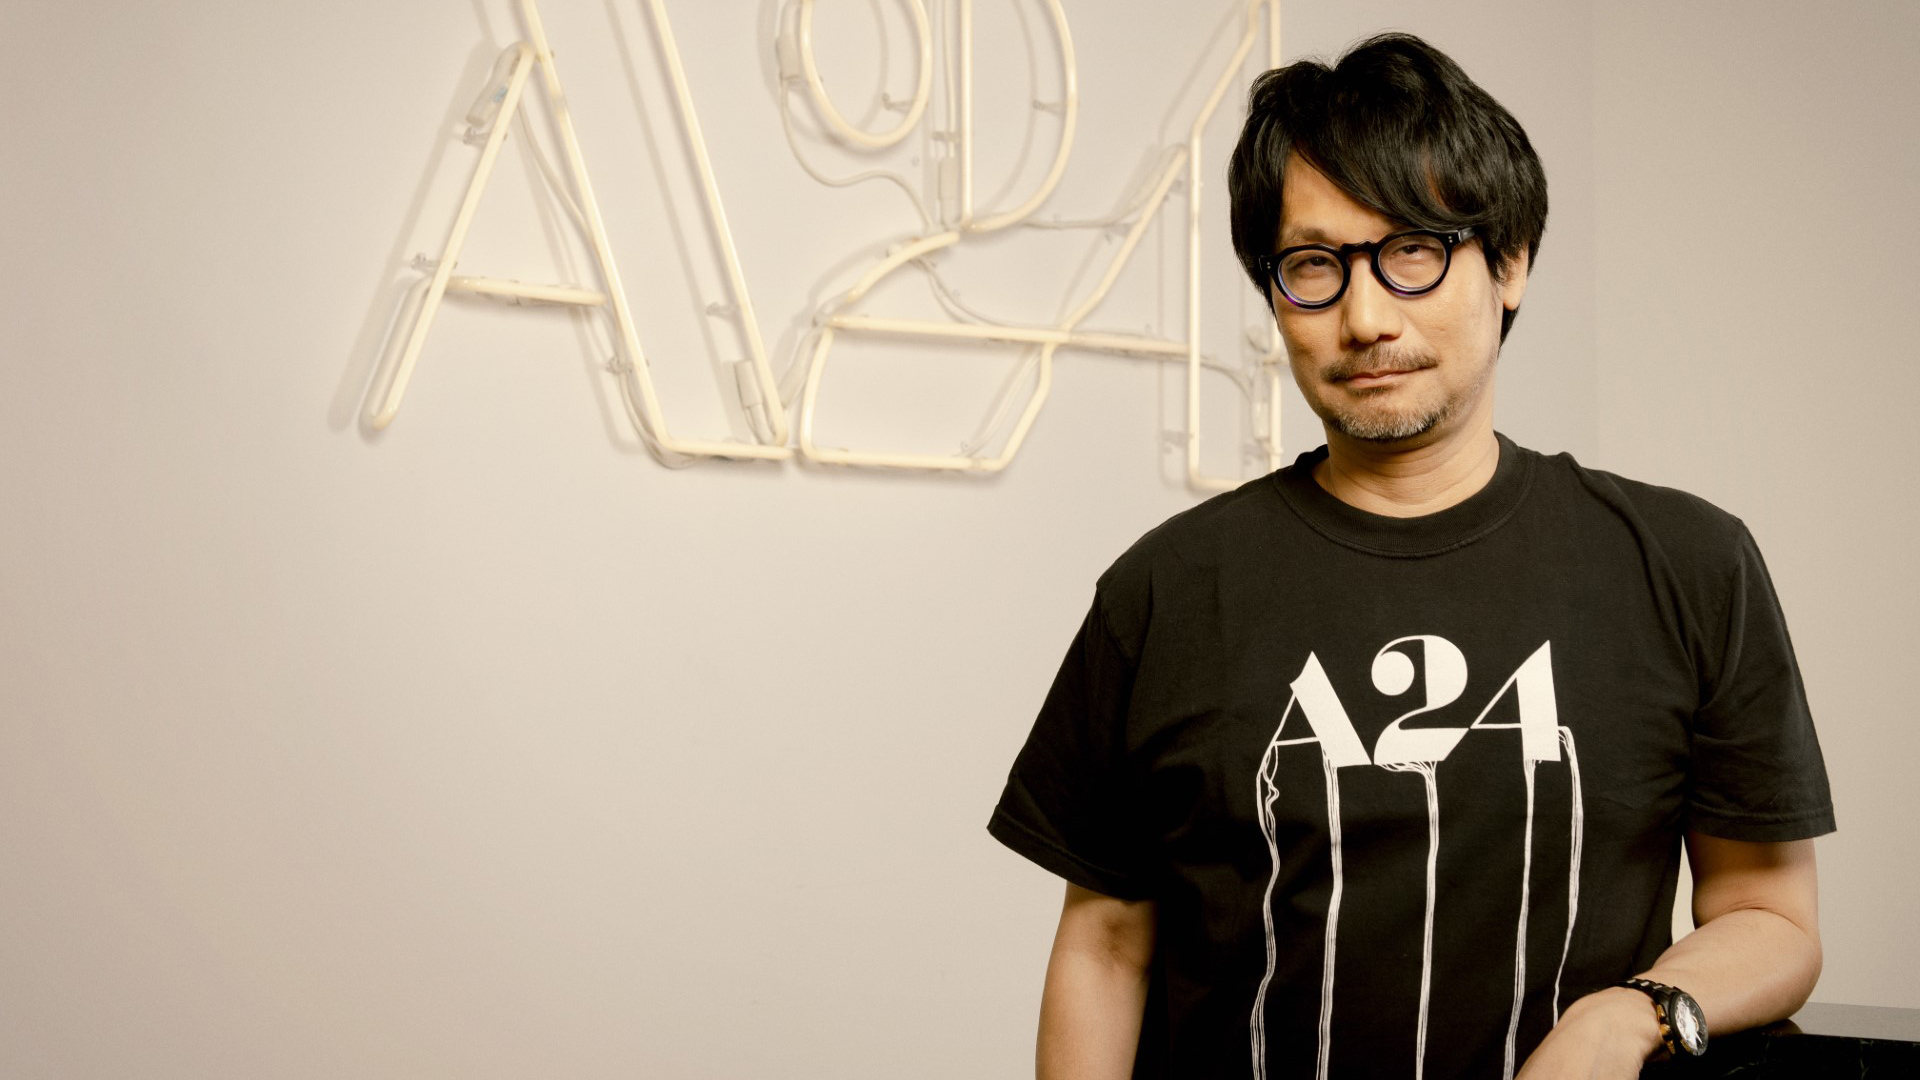 Who Am I? Kojima Productions teaser could hint at Hideo Kojima's